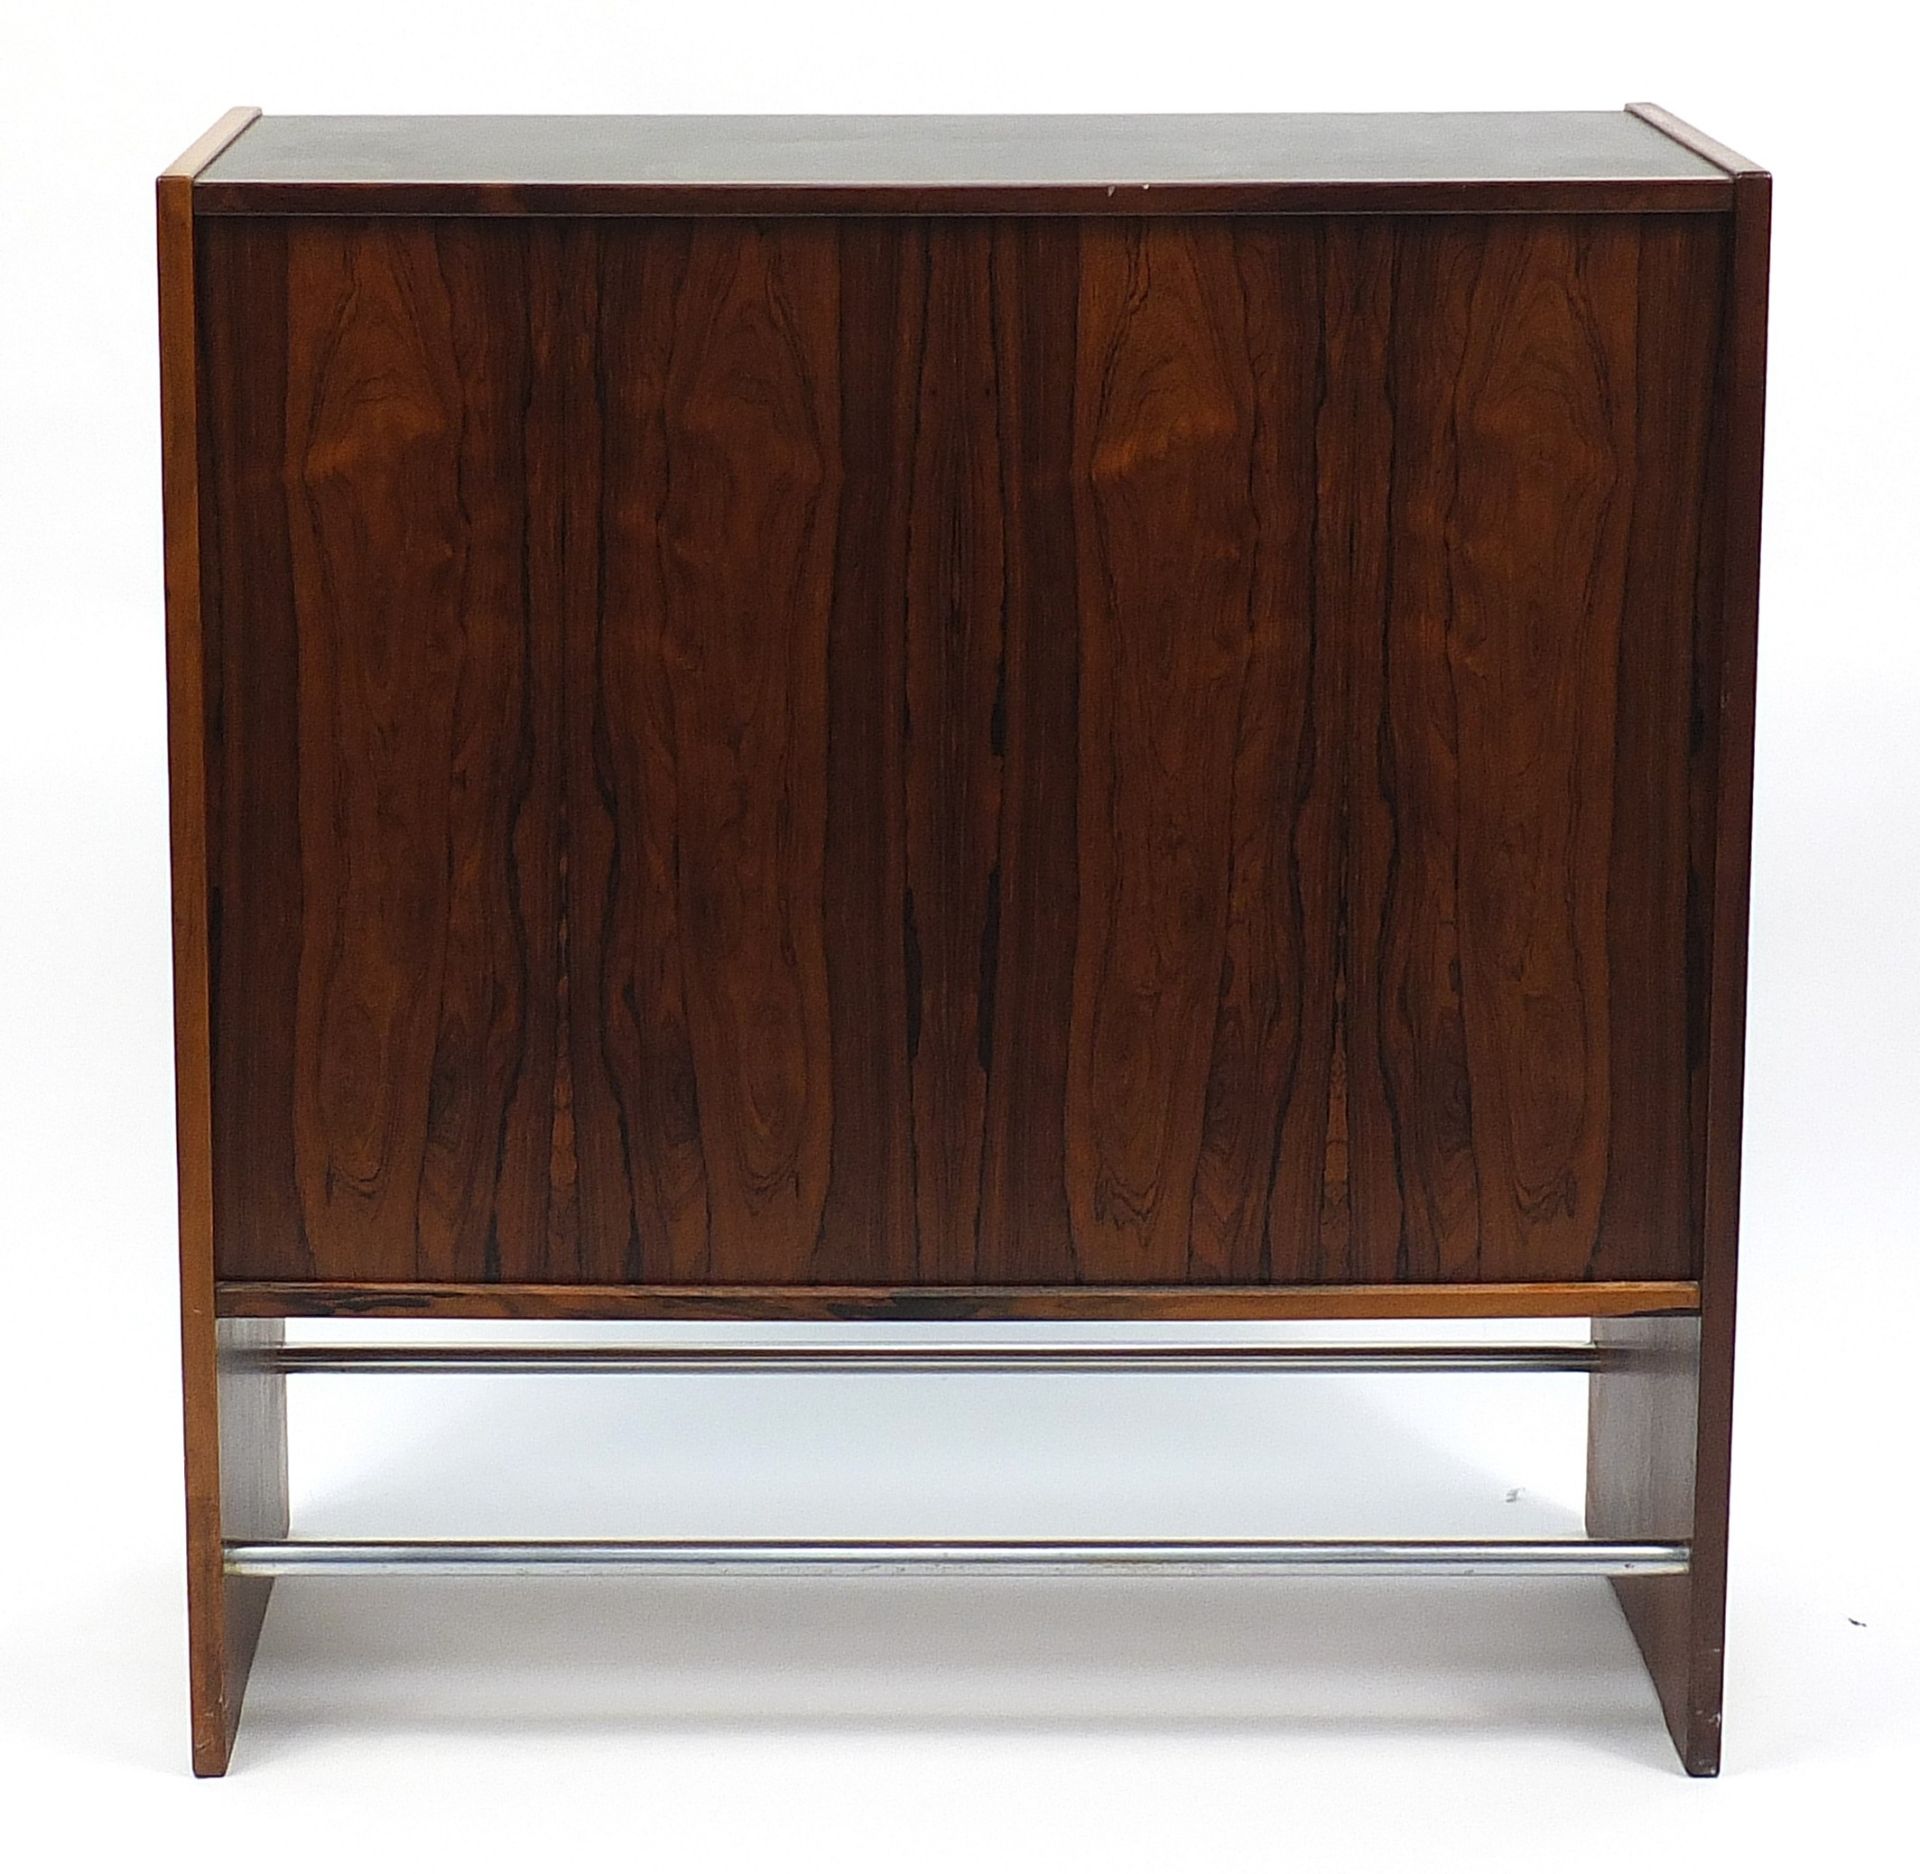 Poul Heltborg for Heltborg Mobler, Danish rosewood cocktail or buffet bar with sliding glass - Image 4 of 4